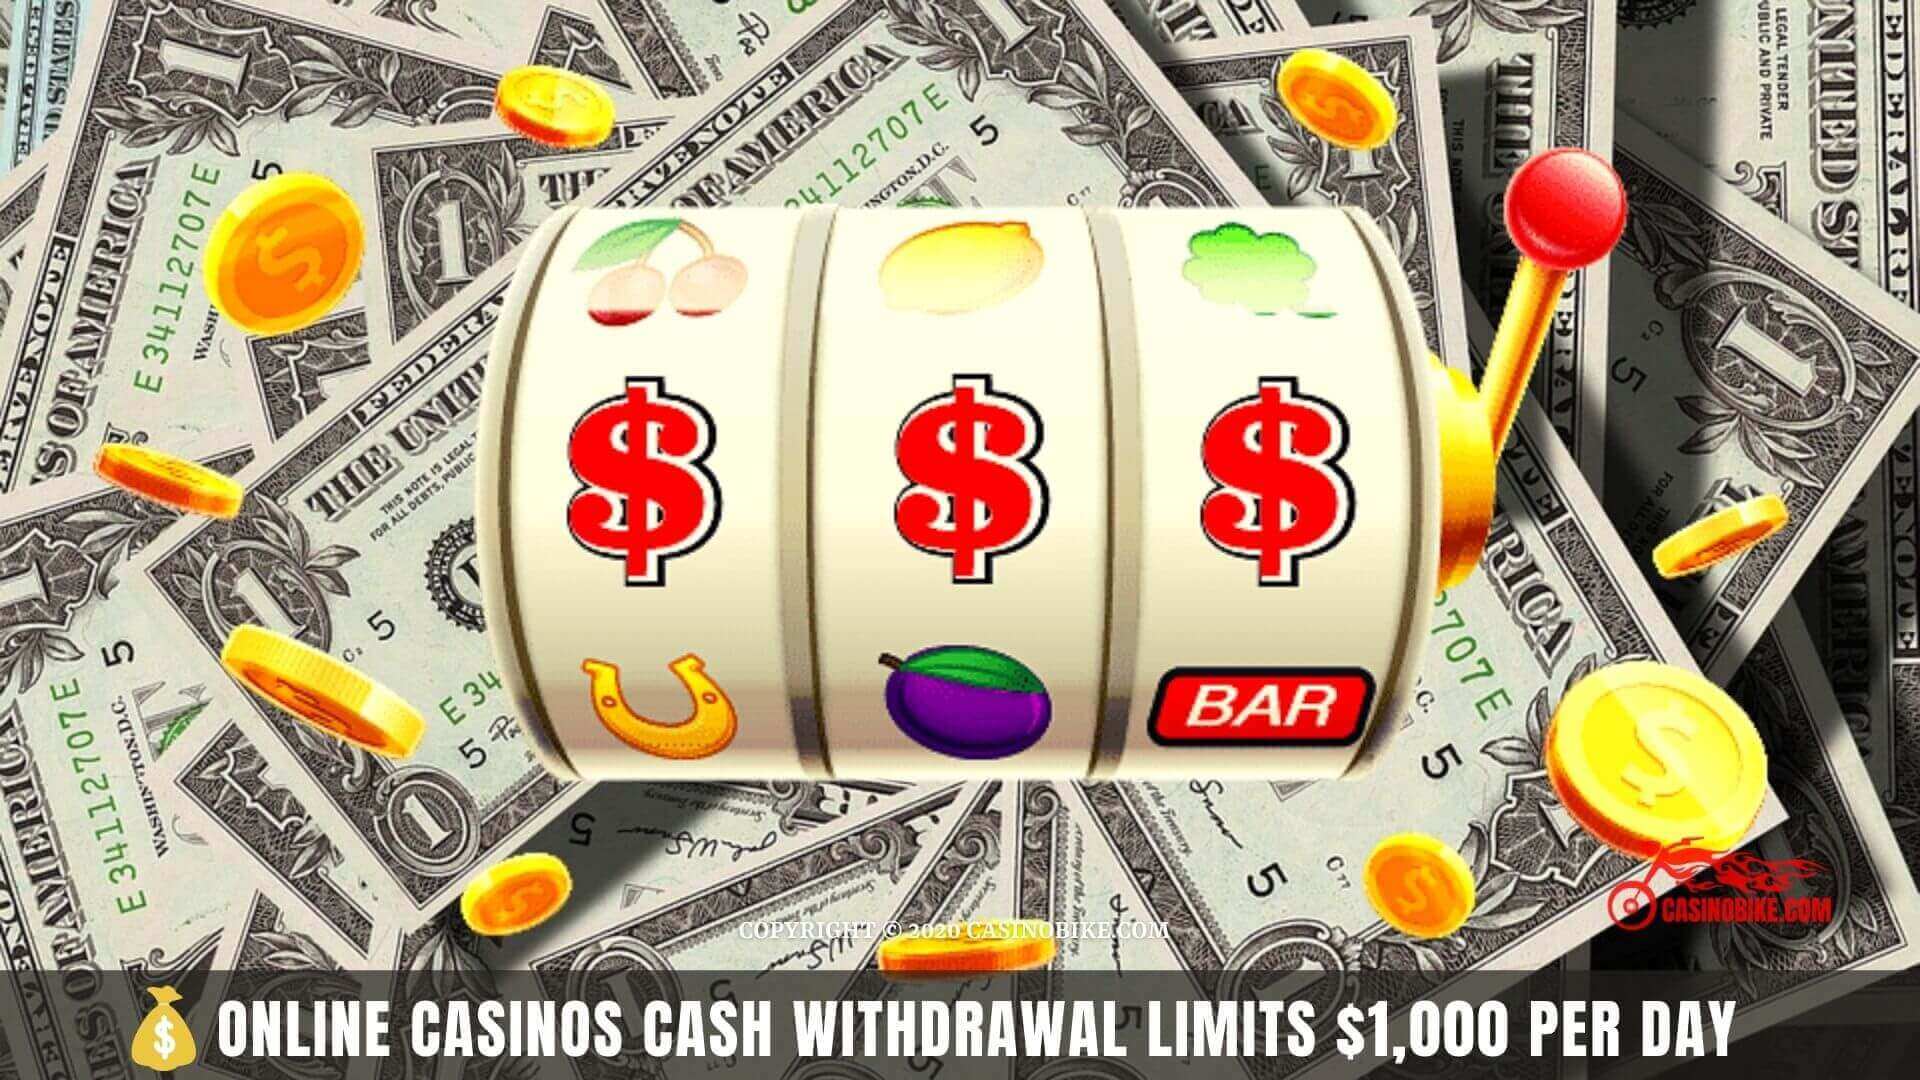 Online casinos cash withdrawal limits $1,000 per day